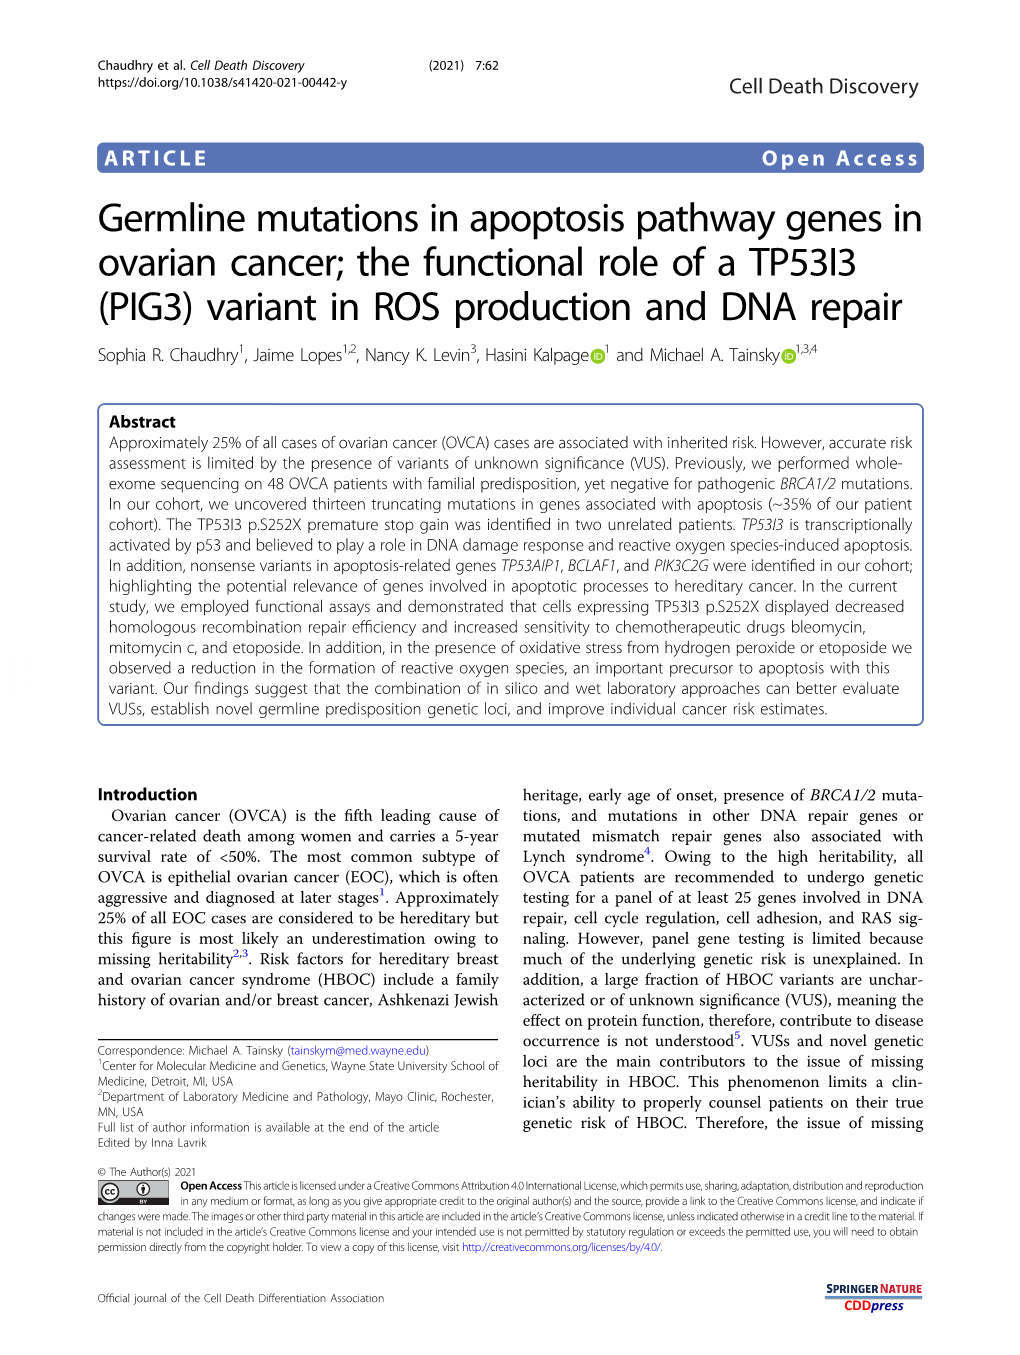 Germline Mutations in Apoptosis Pathway Genes in Ovarian Cancer; the Functional Role of a TP53I3 (PIG3) Variant in ROS Production and DNA Repair Sophia R